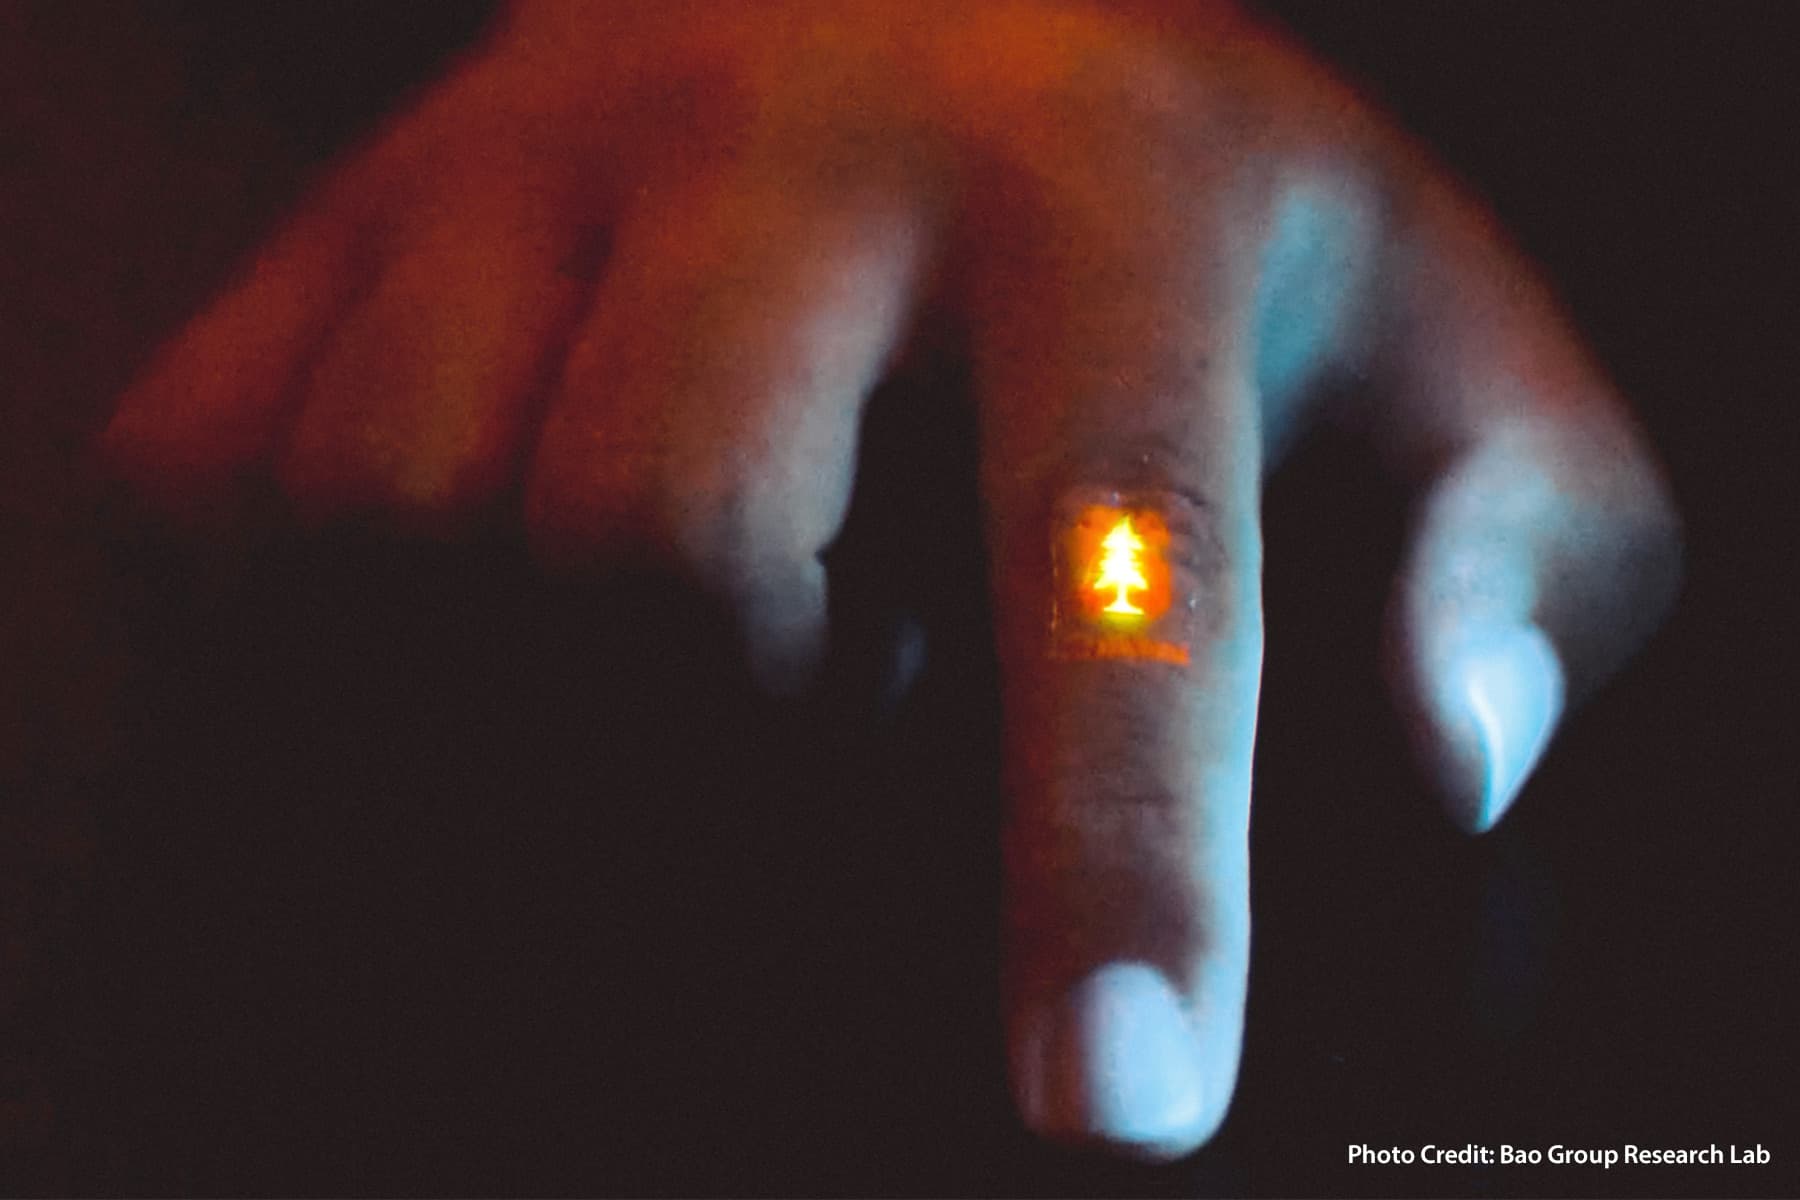 Light-Up ‘Skin-Like’ Plastic Is the Next Step for Wearables